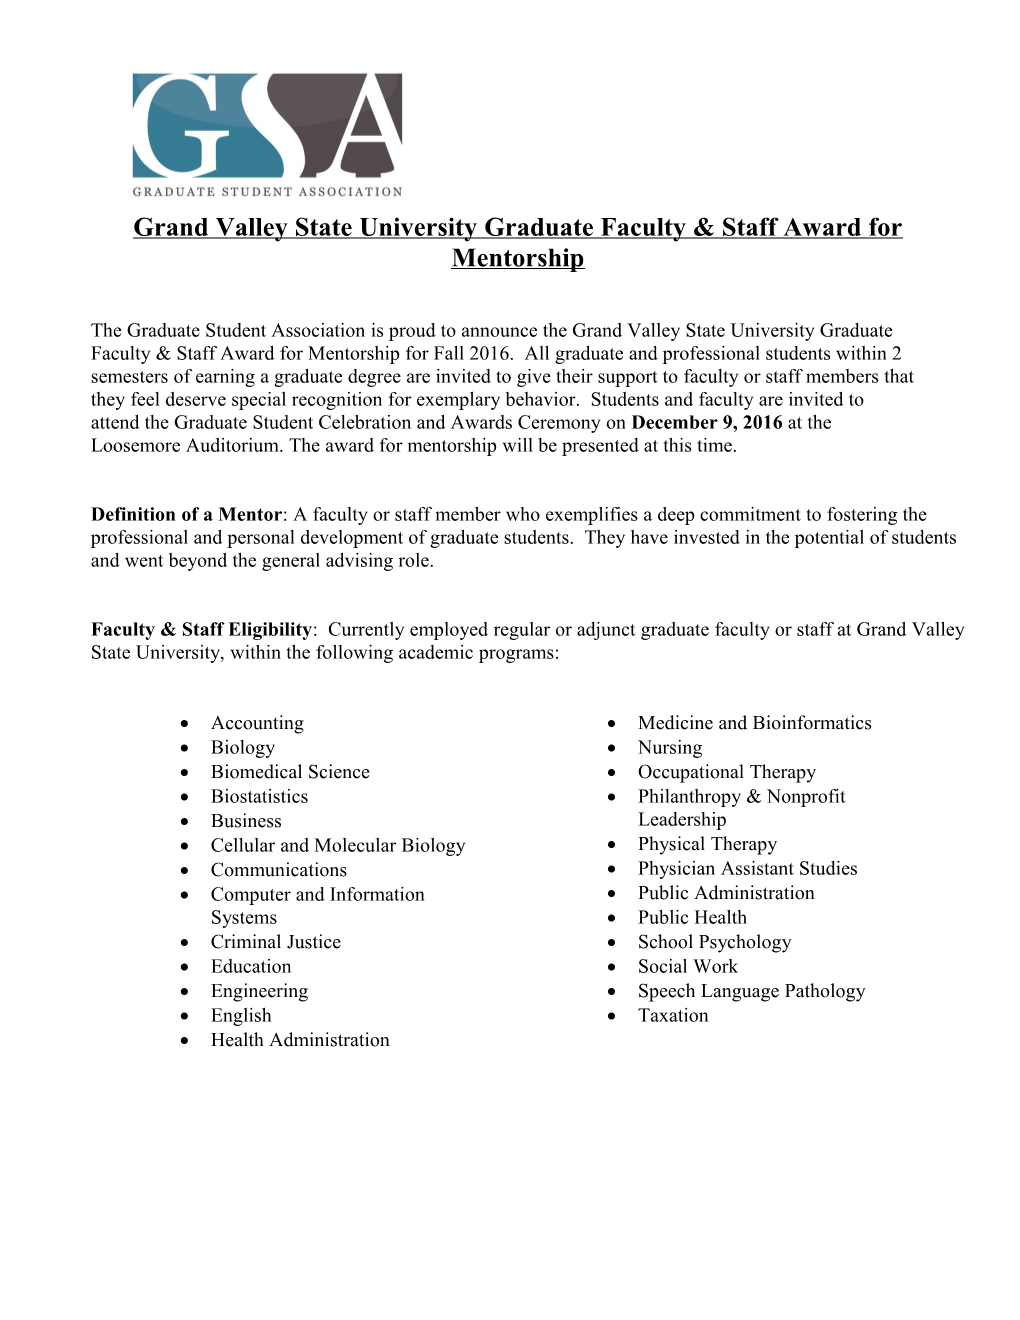 Grand Valley State University Graduate Faculty & Staff Award for Mentorship